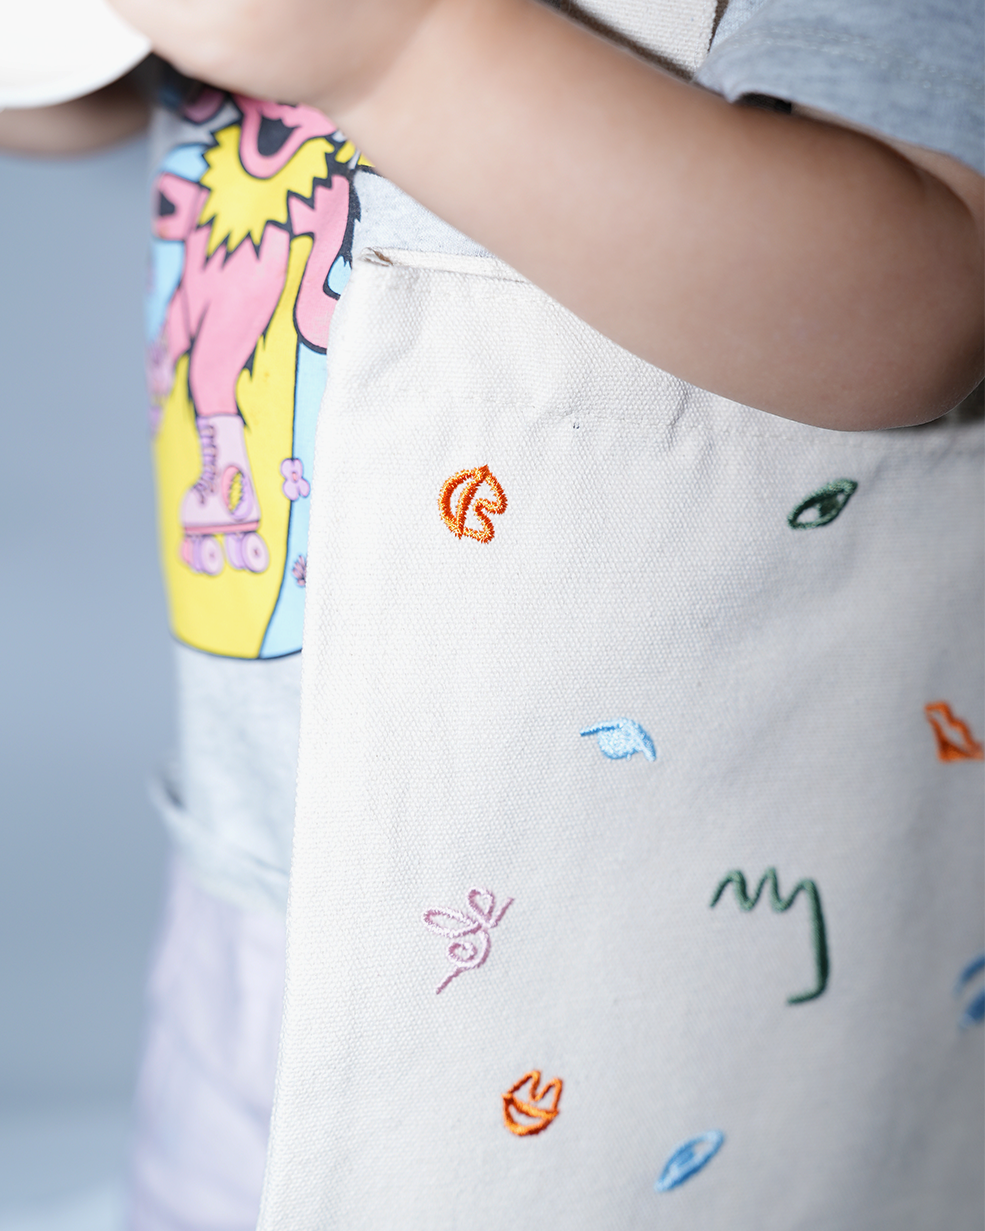 Art Party Embroidered Canvas Mini ToteIdeal for all kids party essentials, this chic, kid-sized embroidered tote can double as party-favor bags and even a special present - perfect for any occasion. Add POP party suppliesArt Party Embroidered Canvas Mini Tote mini tote bag